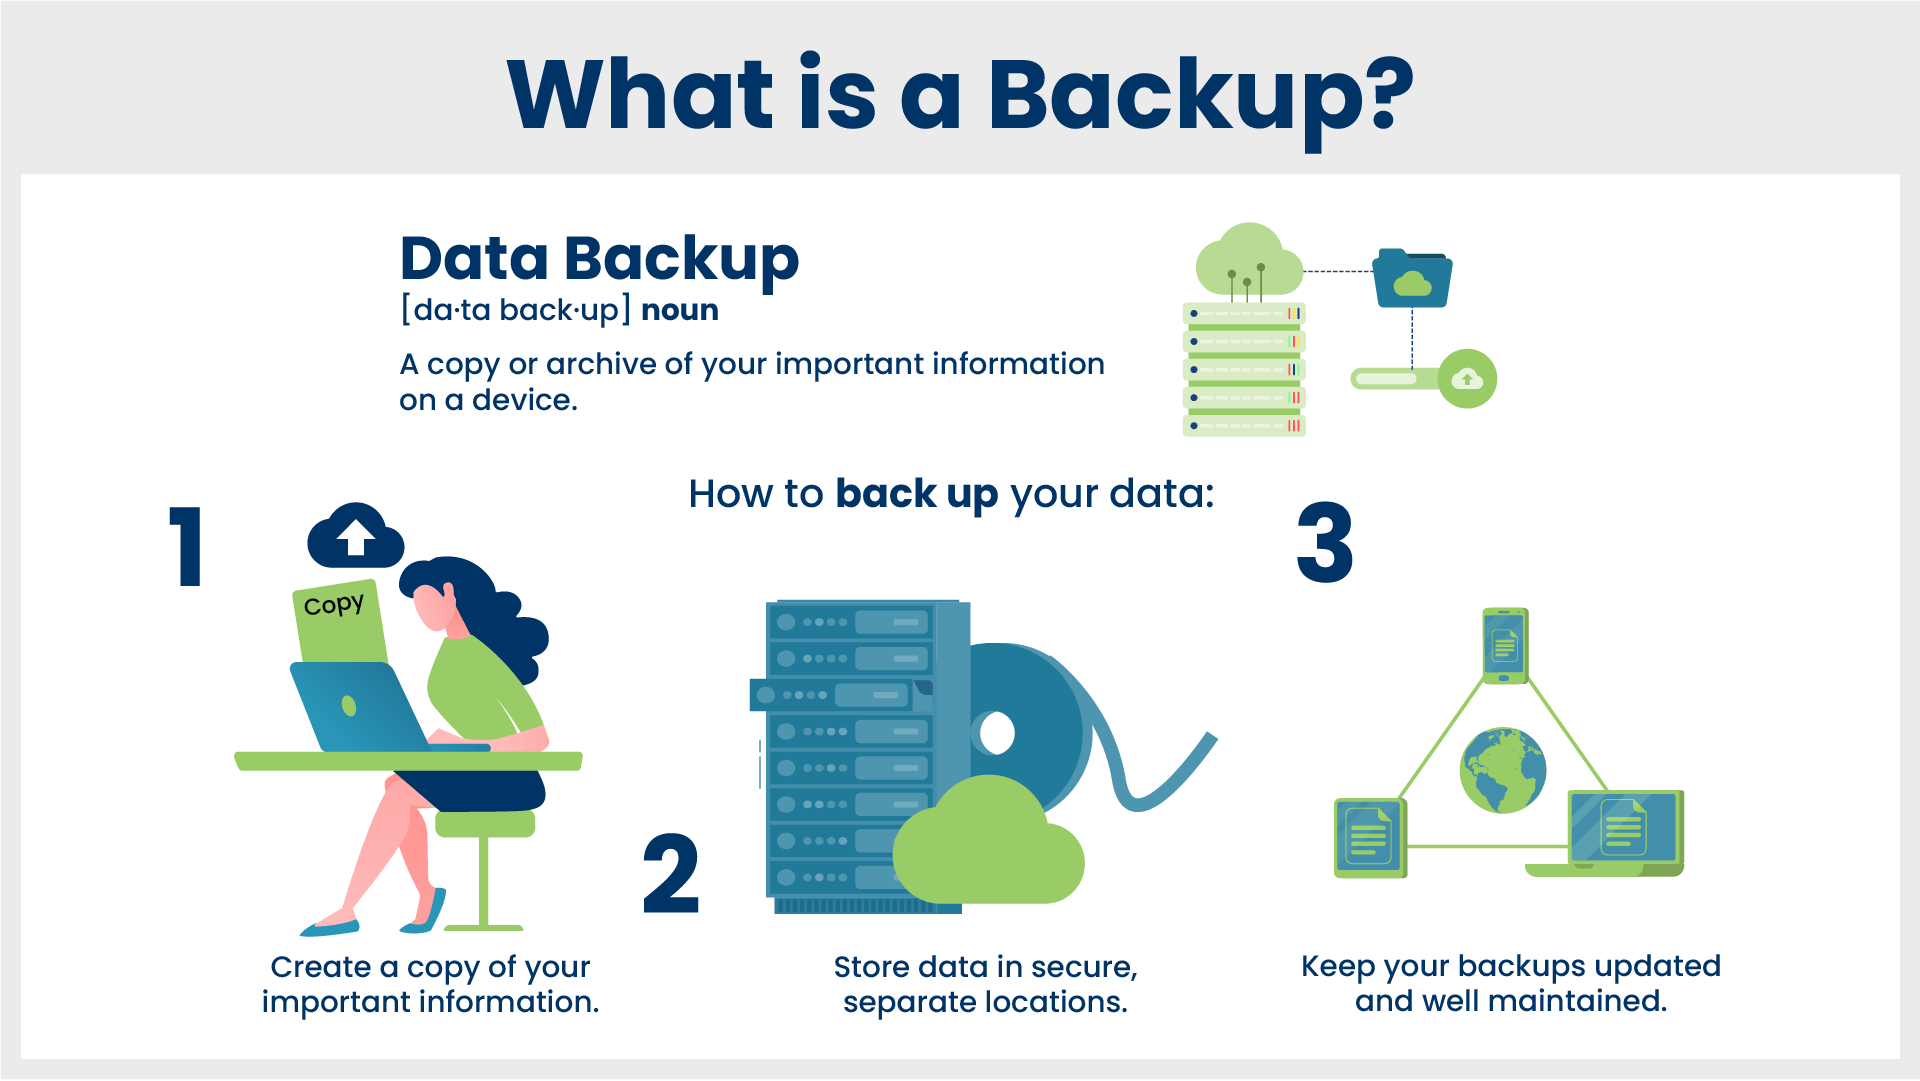 How Does Data Backup And Recovery Protect Your Important Files And Data? What are the benefits of Data Backup and Recovery?